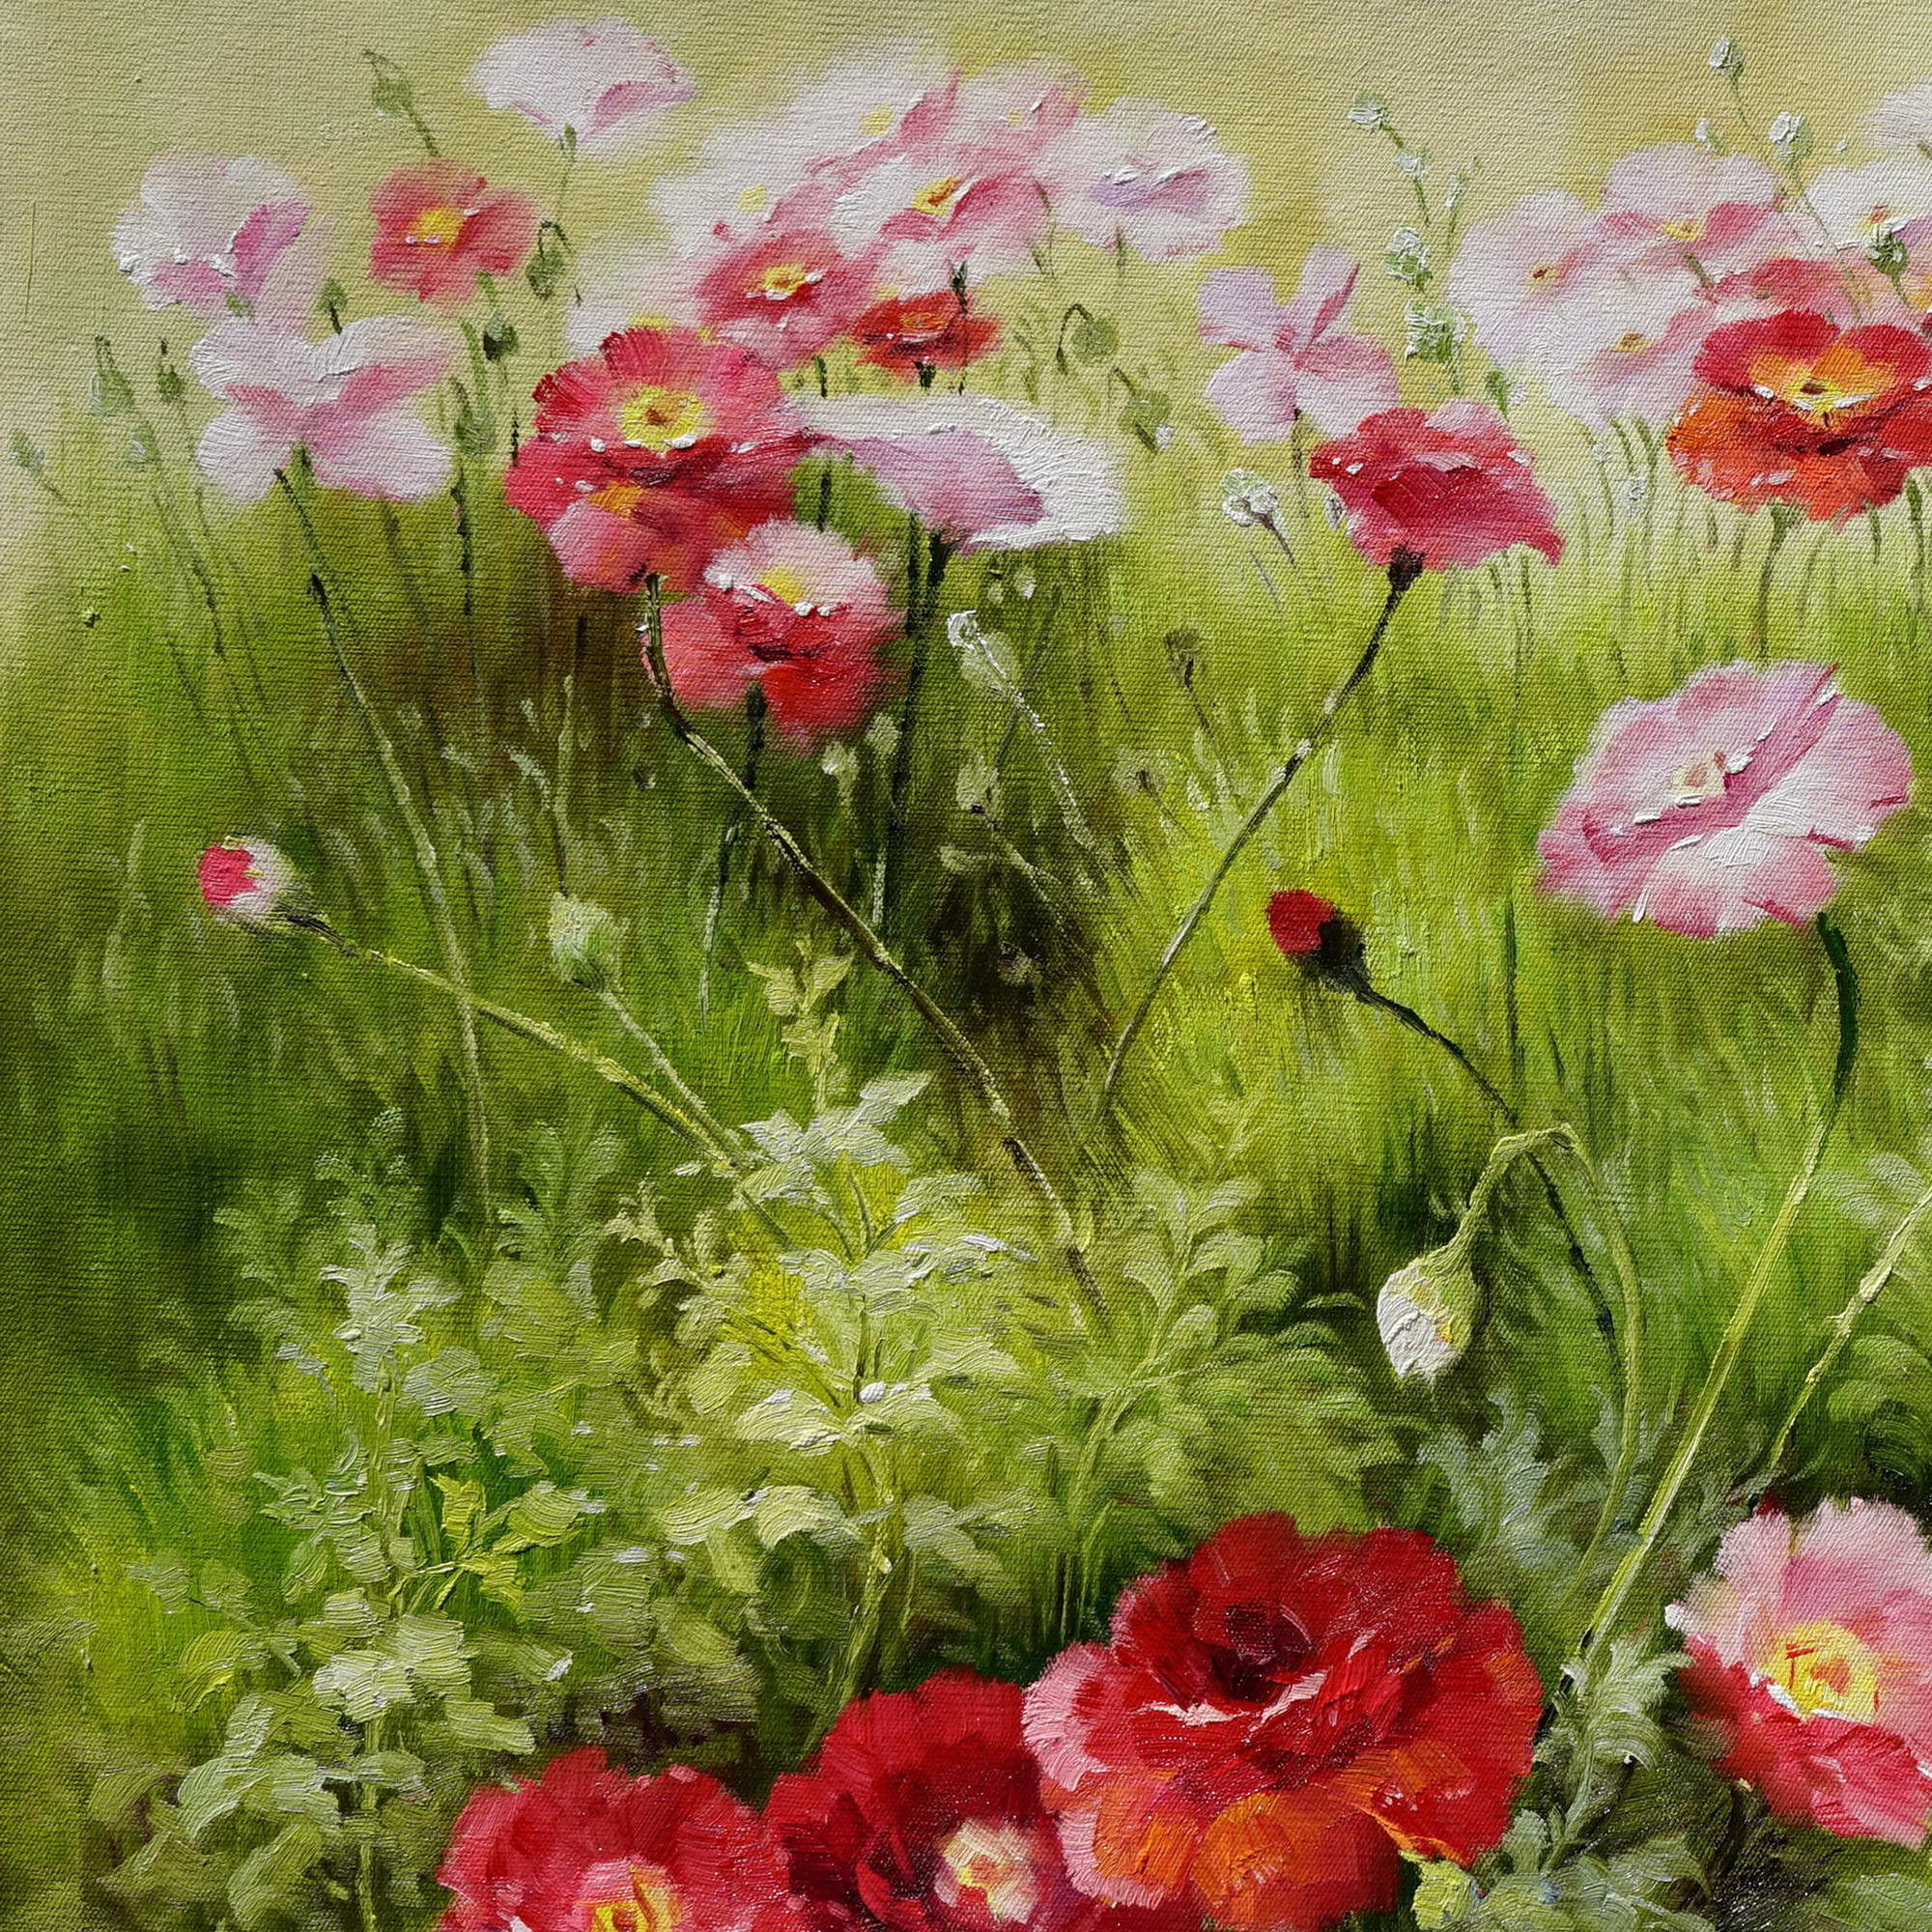 Hand painted Field of Flowers 75x150cm